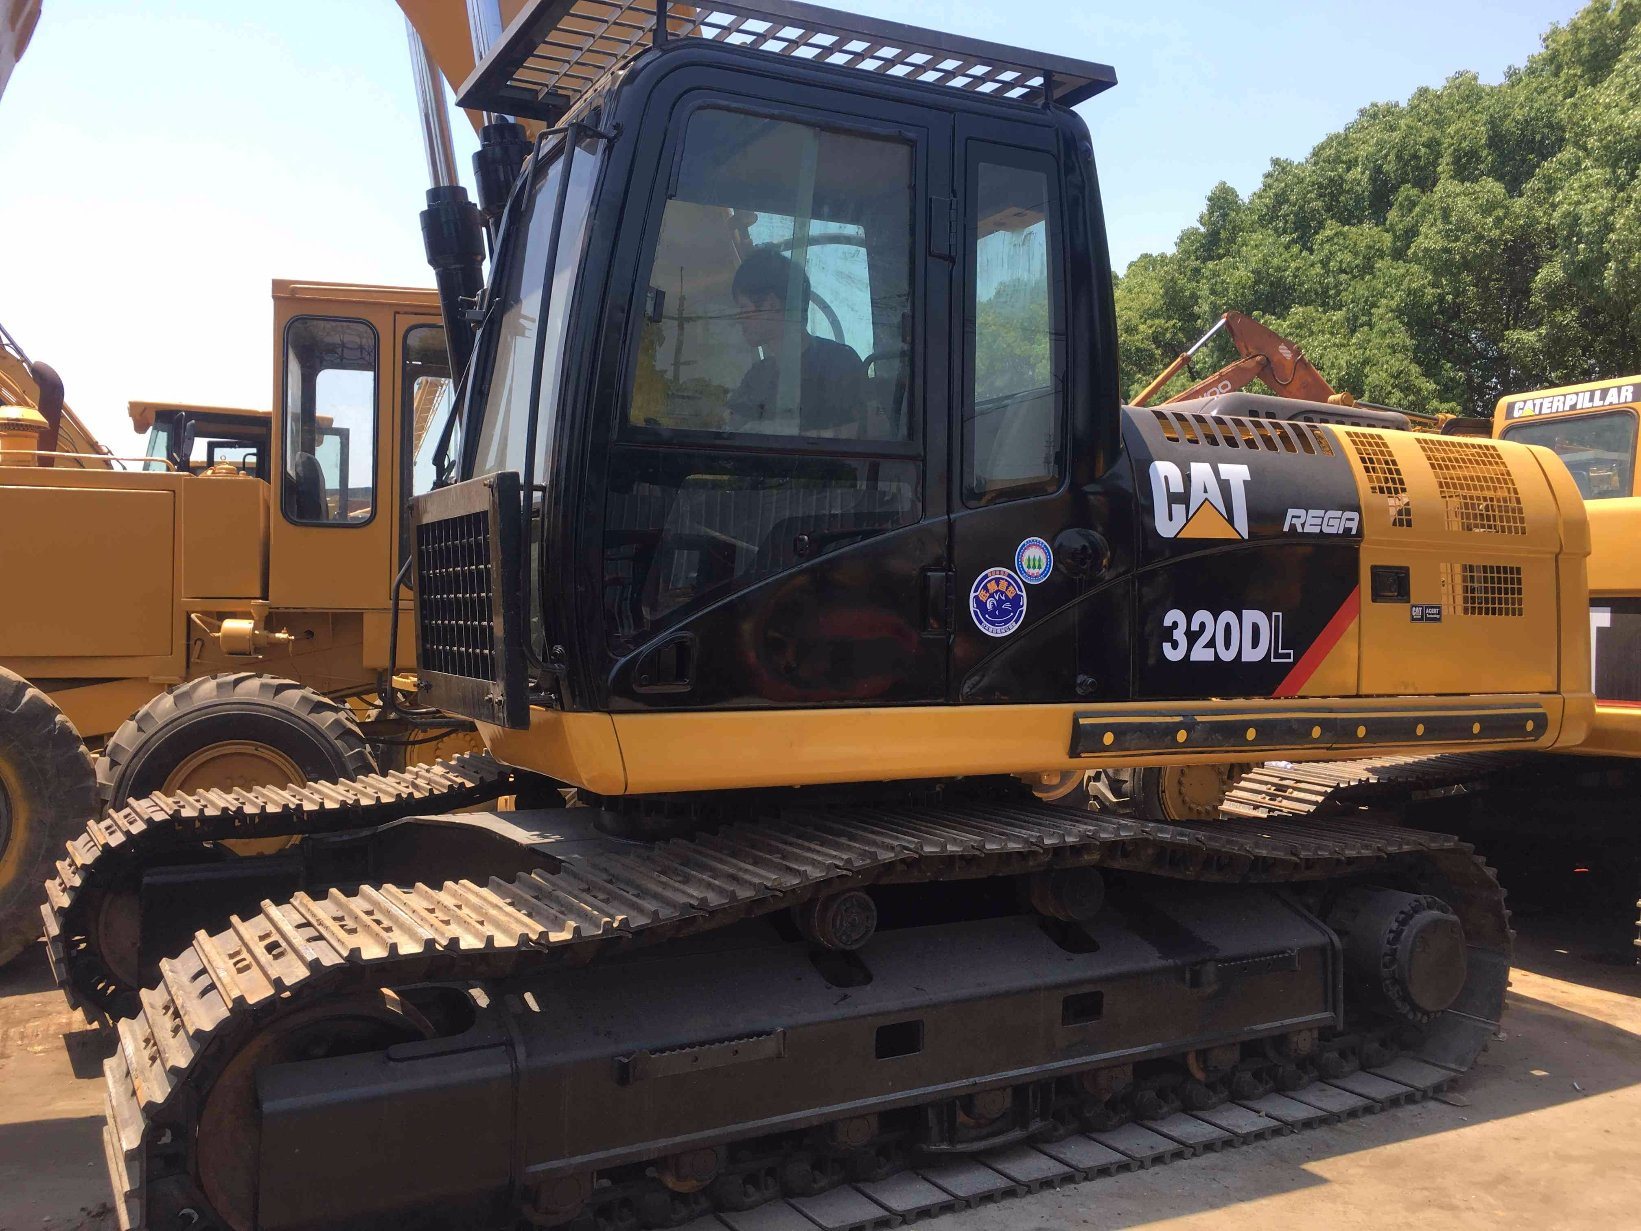 Used Cat 320d Excavator Original Japan with High Quality Low Price